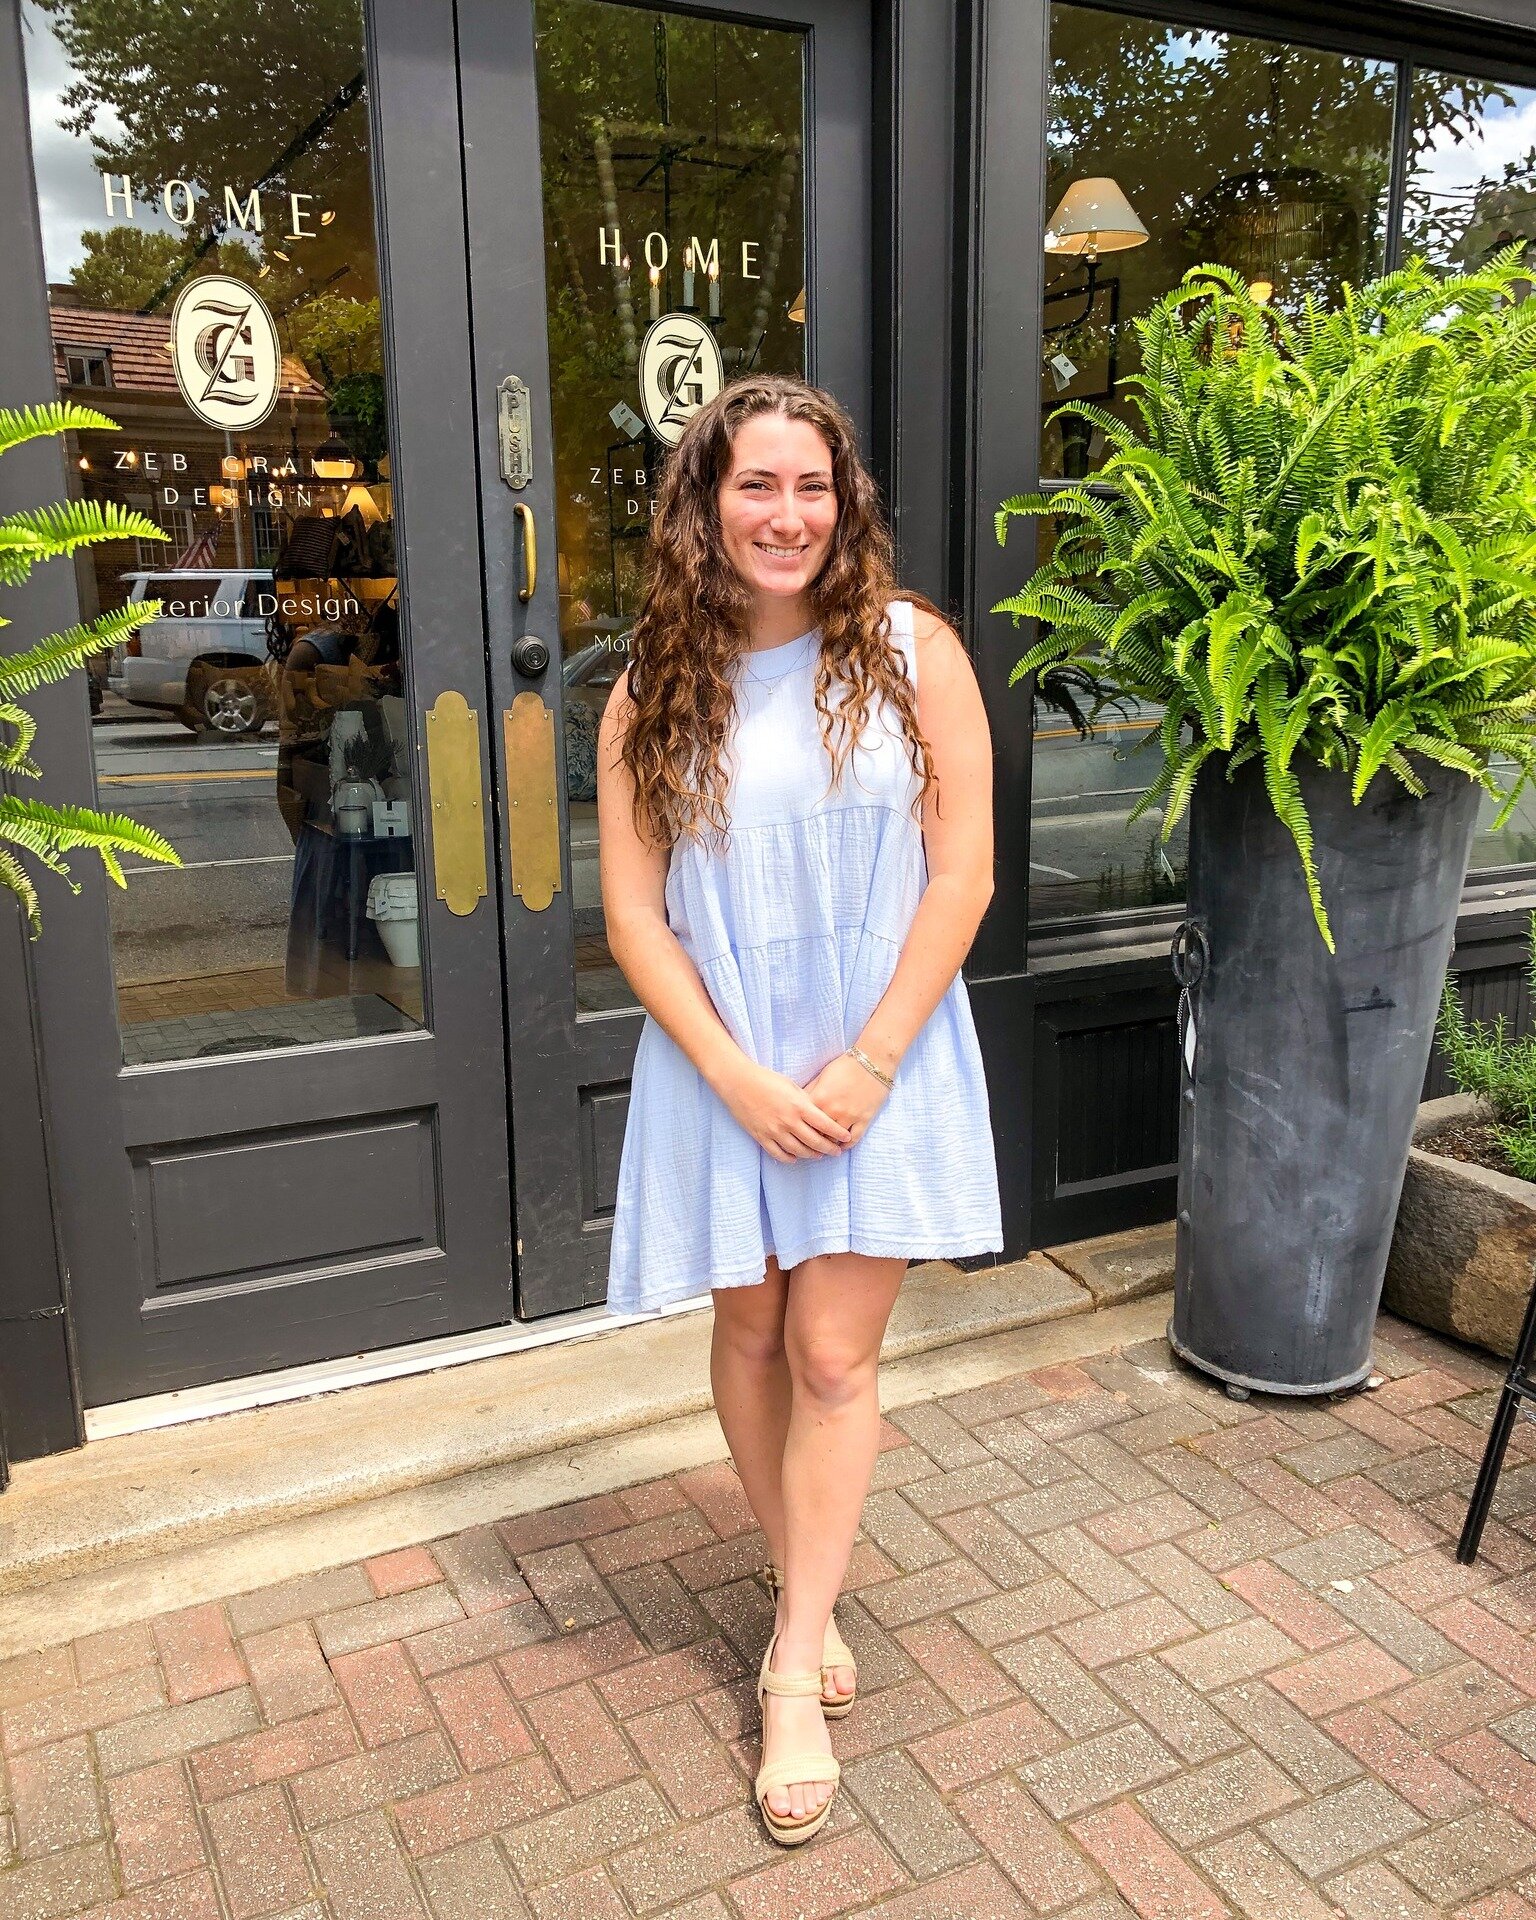 Introducing Lily, one of our summer interns! Lily is currently a junior at the University of Kentucky majoring in Interior Design. Her favorite class at the moment is Environmental Systems. When Lily's not learning about the ins and outs of the inter